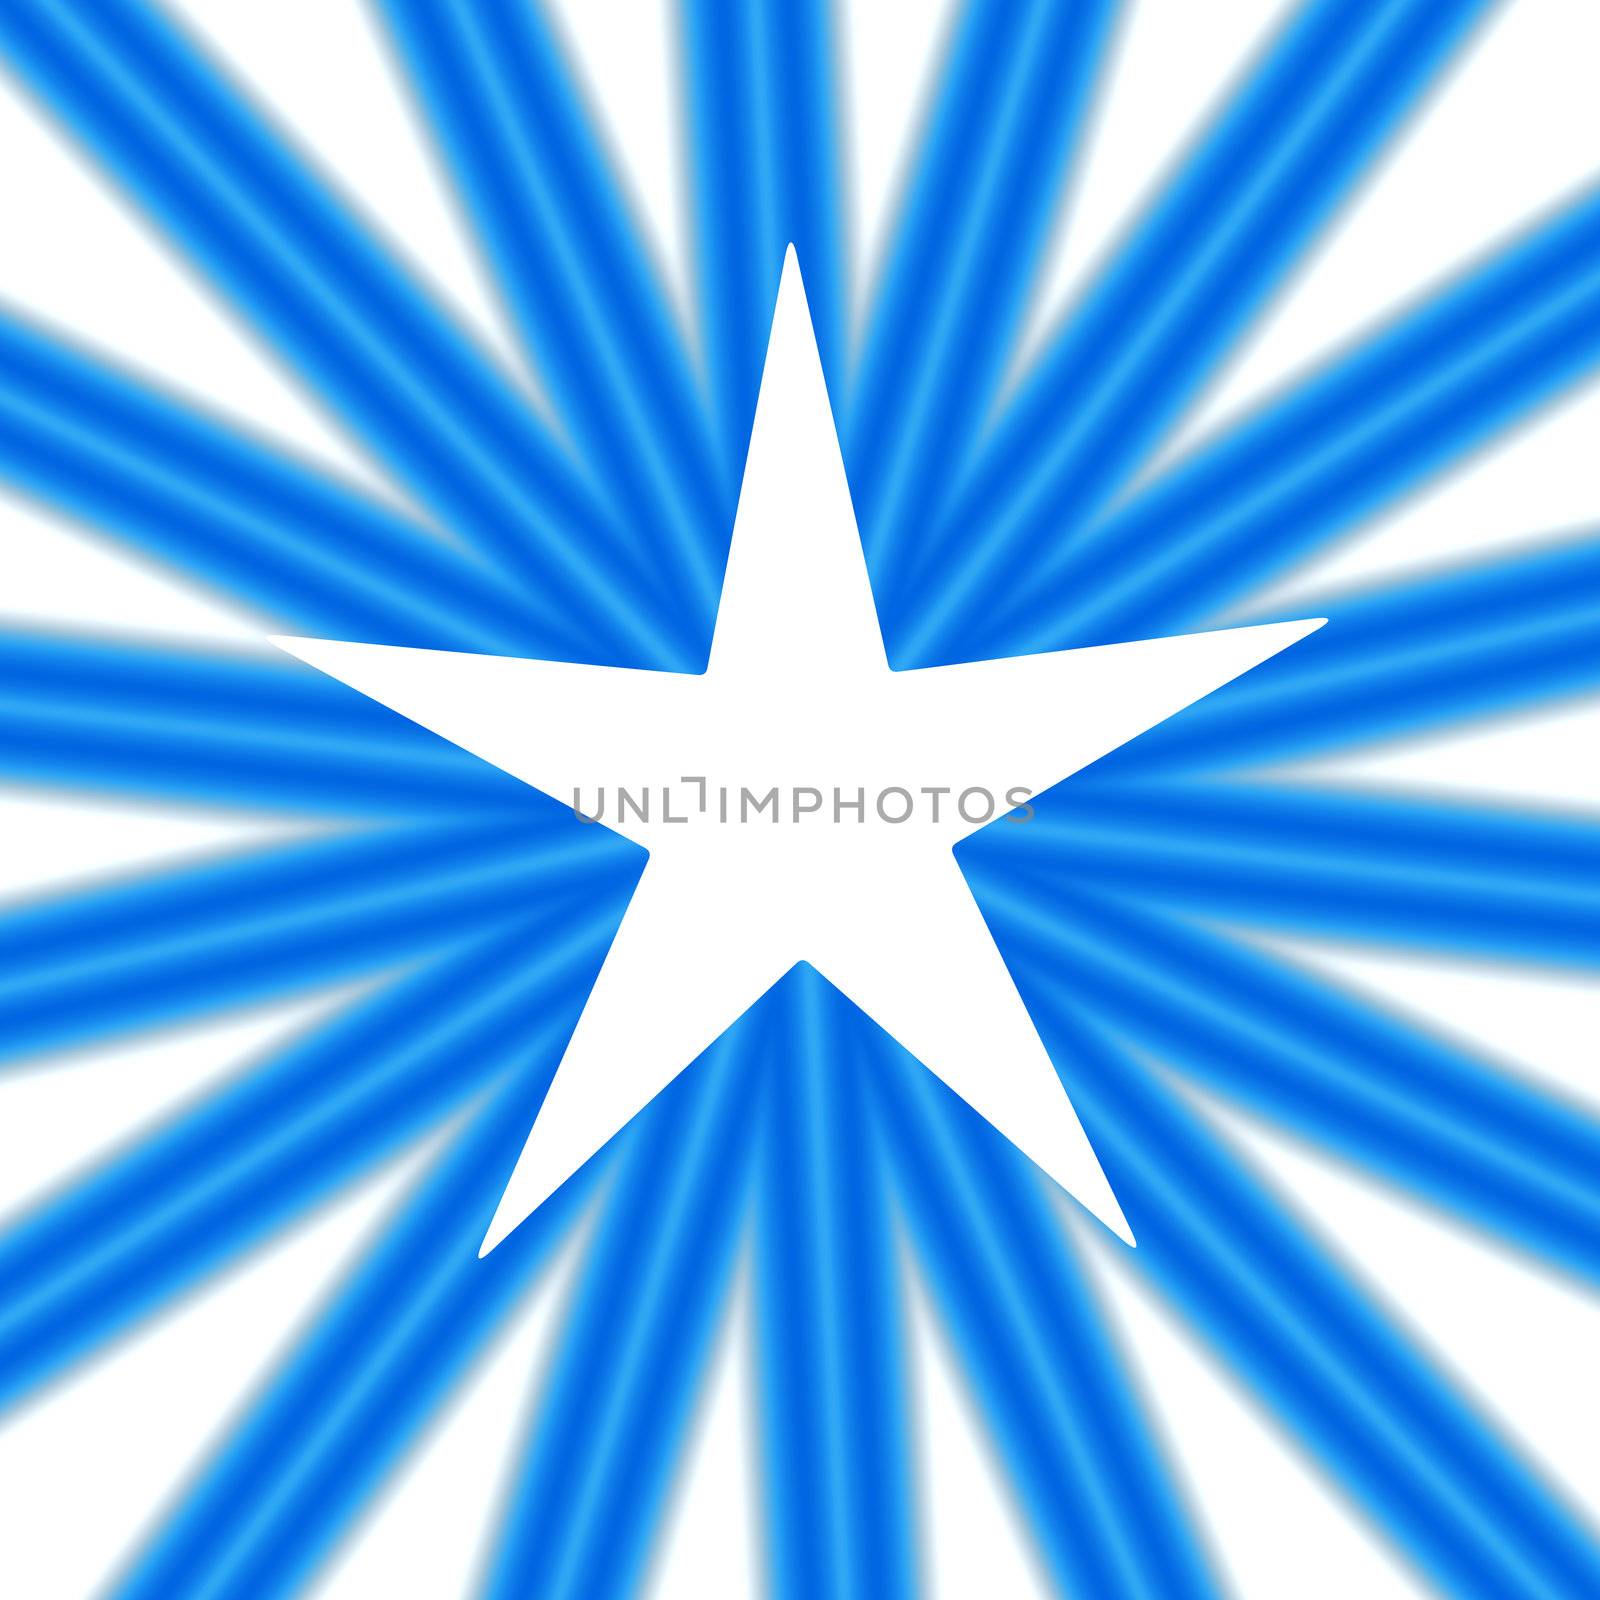 An abstract illustration of a white star on a background of radiating blue lines.